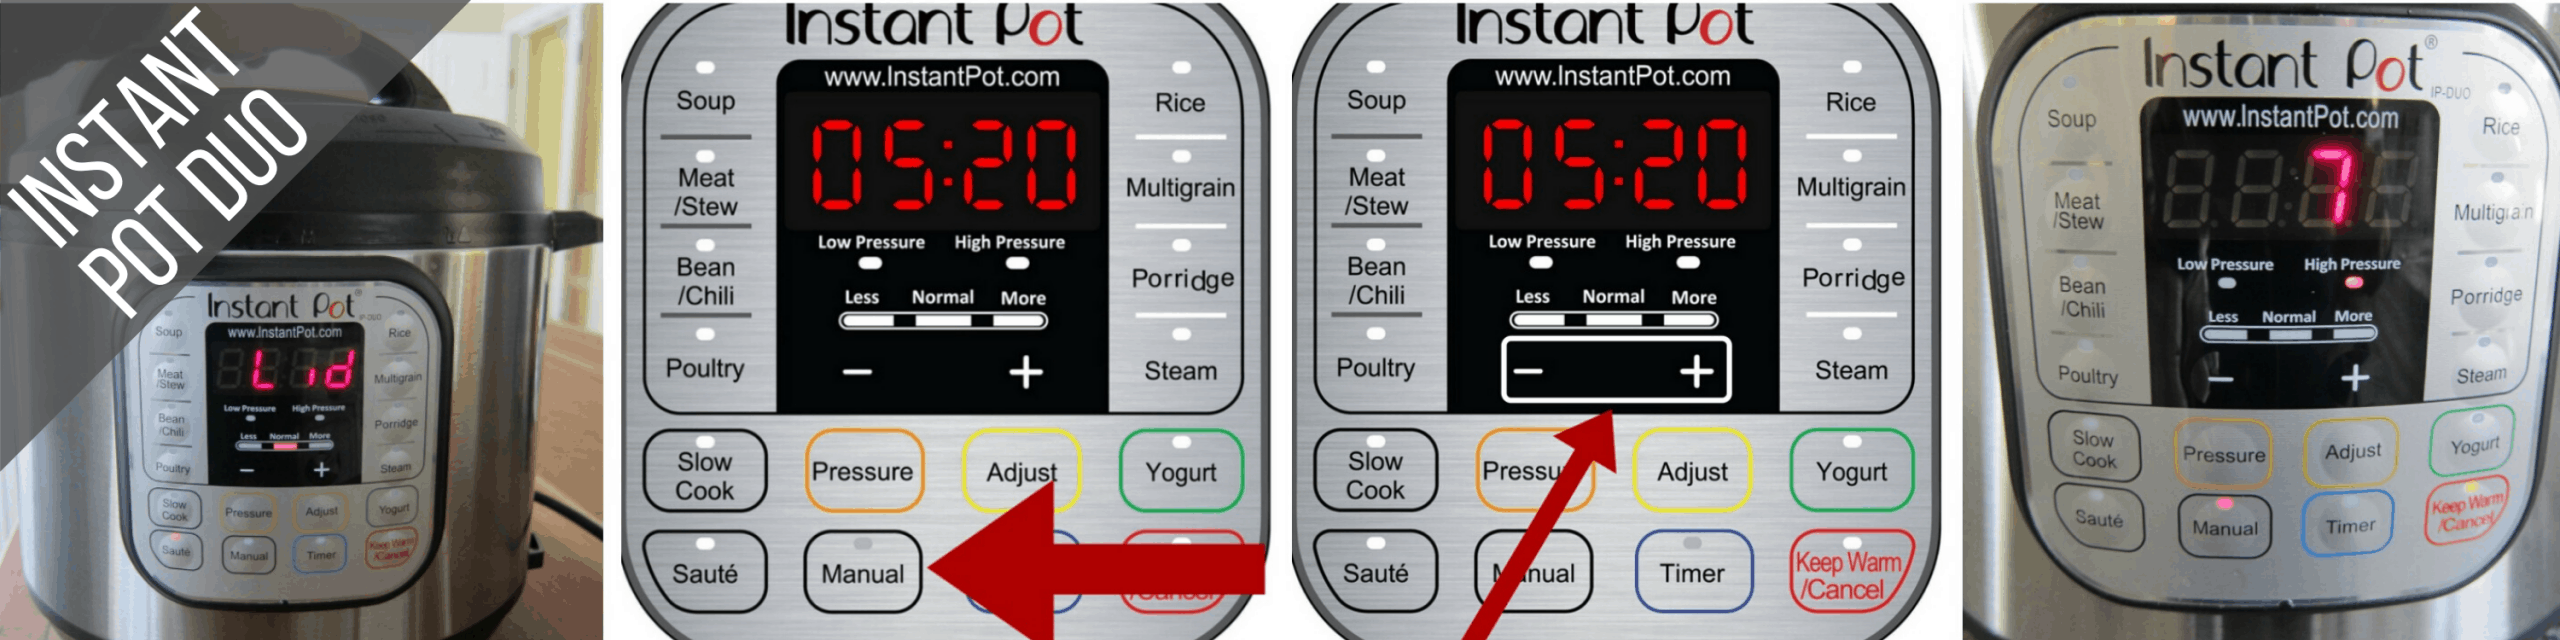 Instant Pot Duo Manual mode 7 minutes collage - close lid, press manual, press - or +, display shows 7 - Paint the Kitchen Red